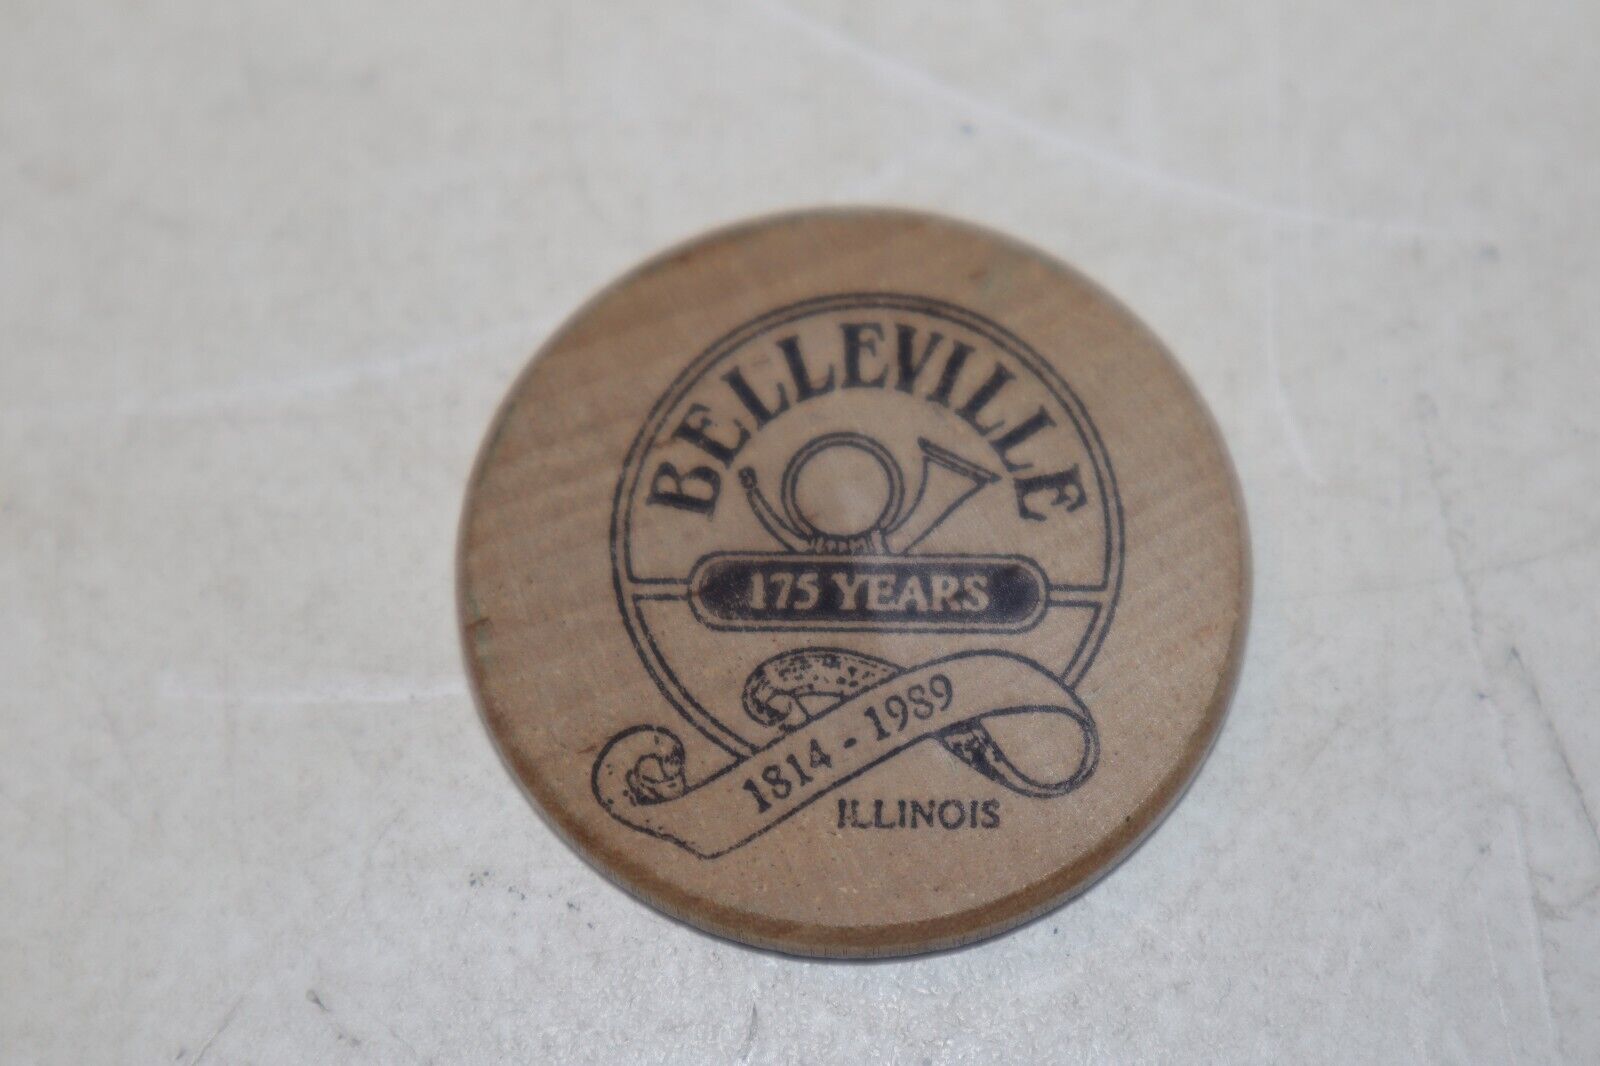 Primary image for 1989 Belleville, IL 175th Anniversary Wooden Nickel Beer Token 1814-1989